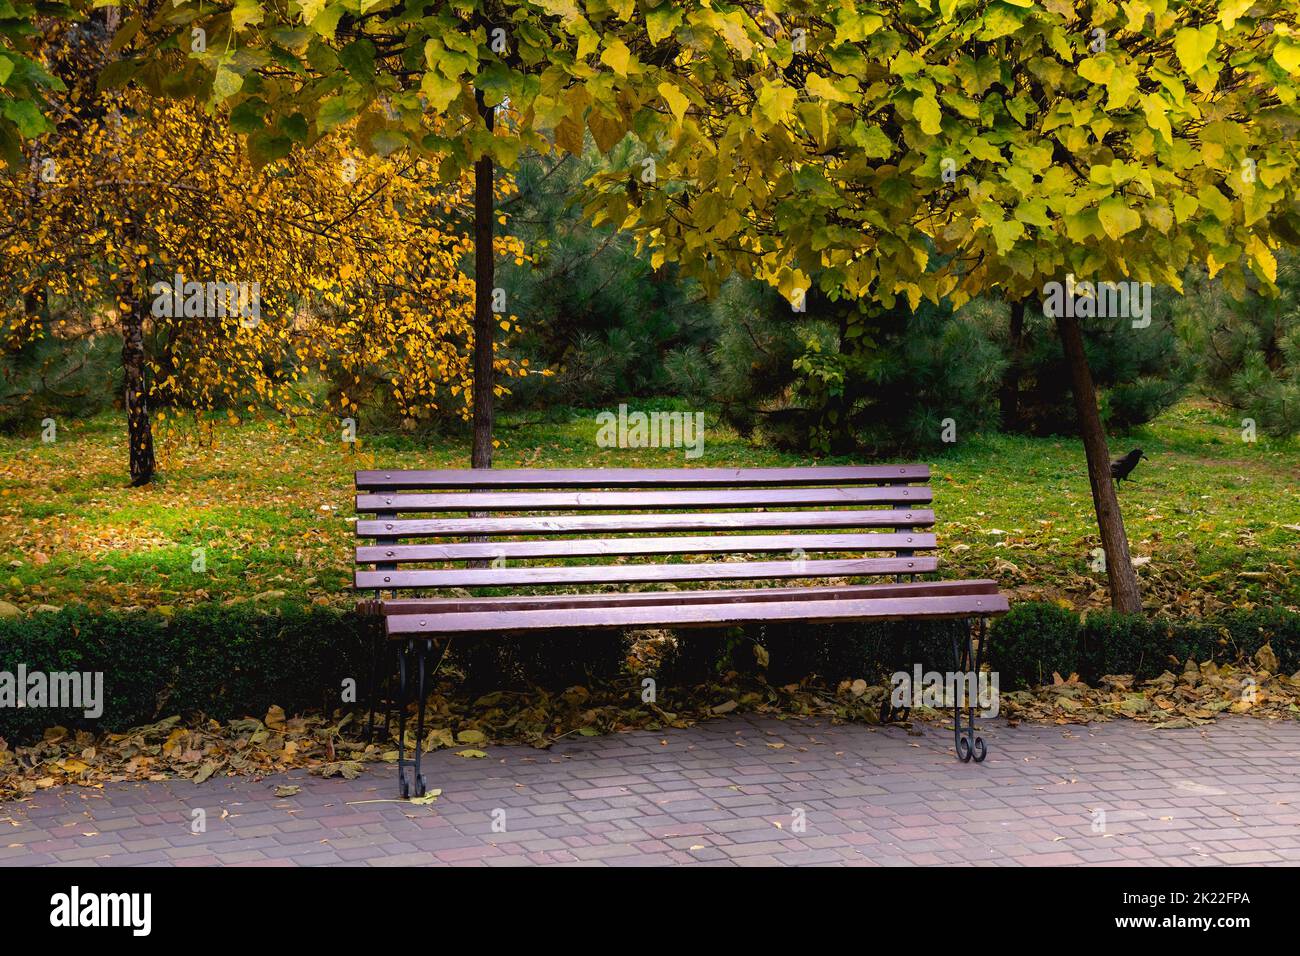 Wooden bench in the city park in autumn Stock Photo